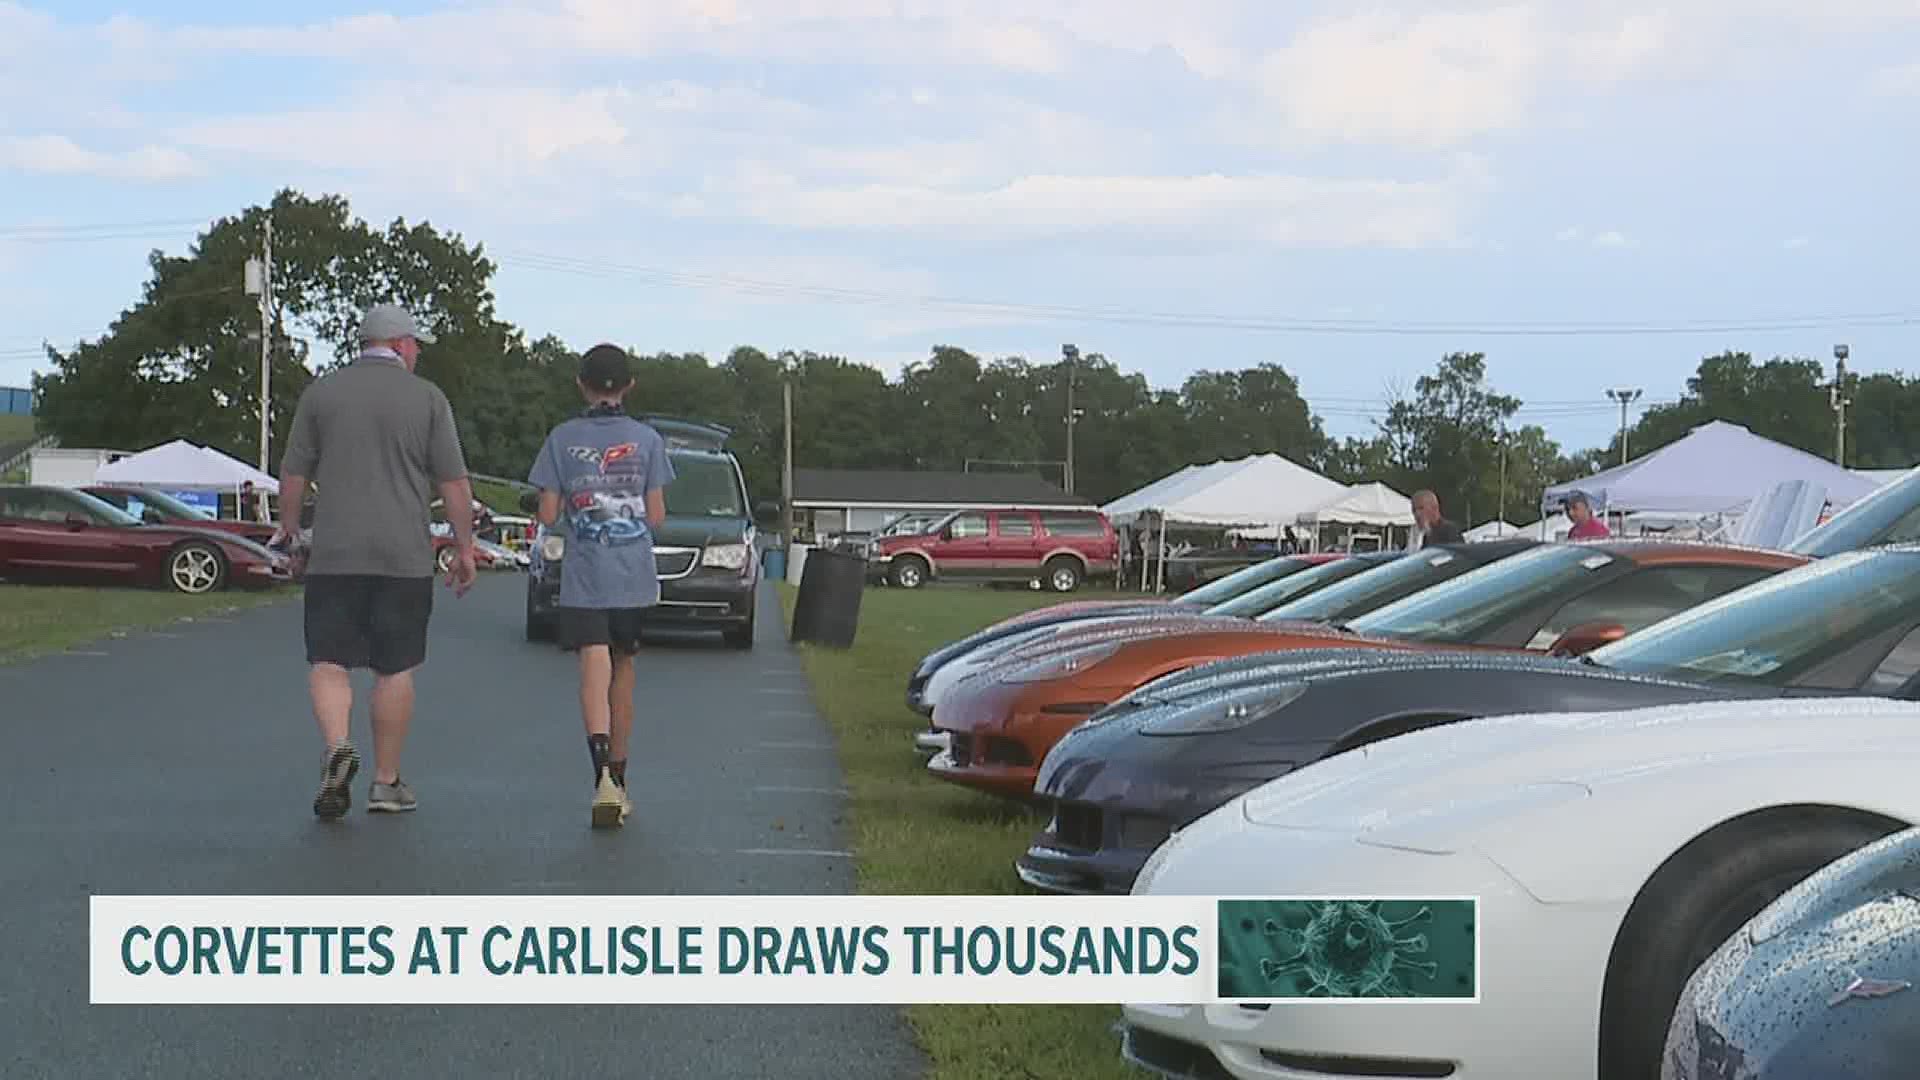 This year, organizers say the world's "largest Corvette event" brought less people, many more masks because of COVID-19, and even some rain.